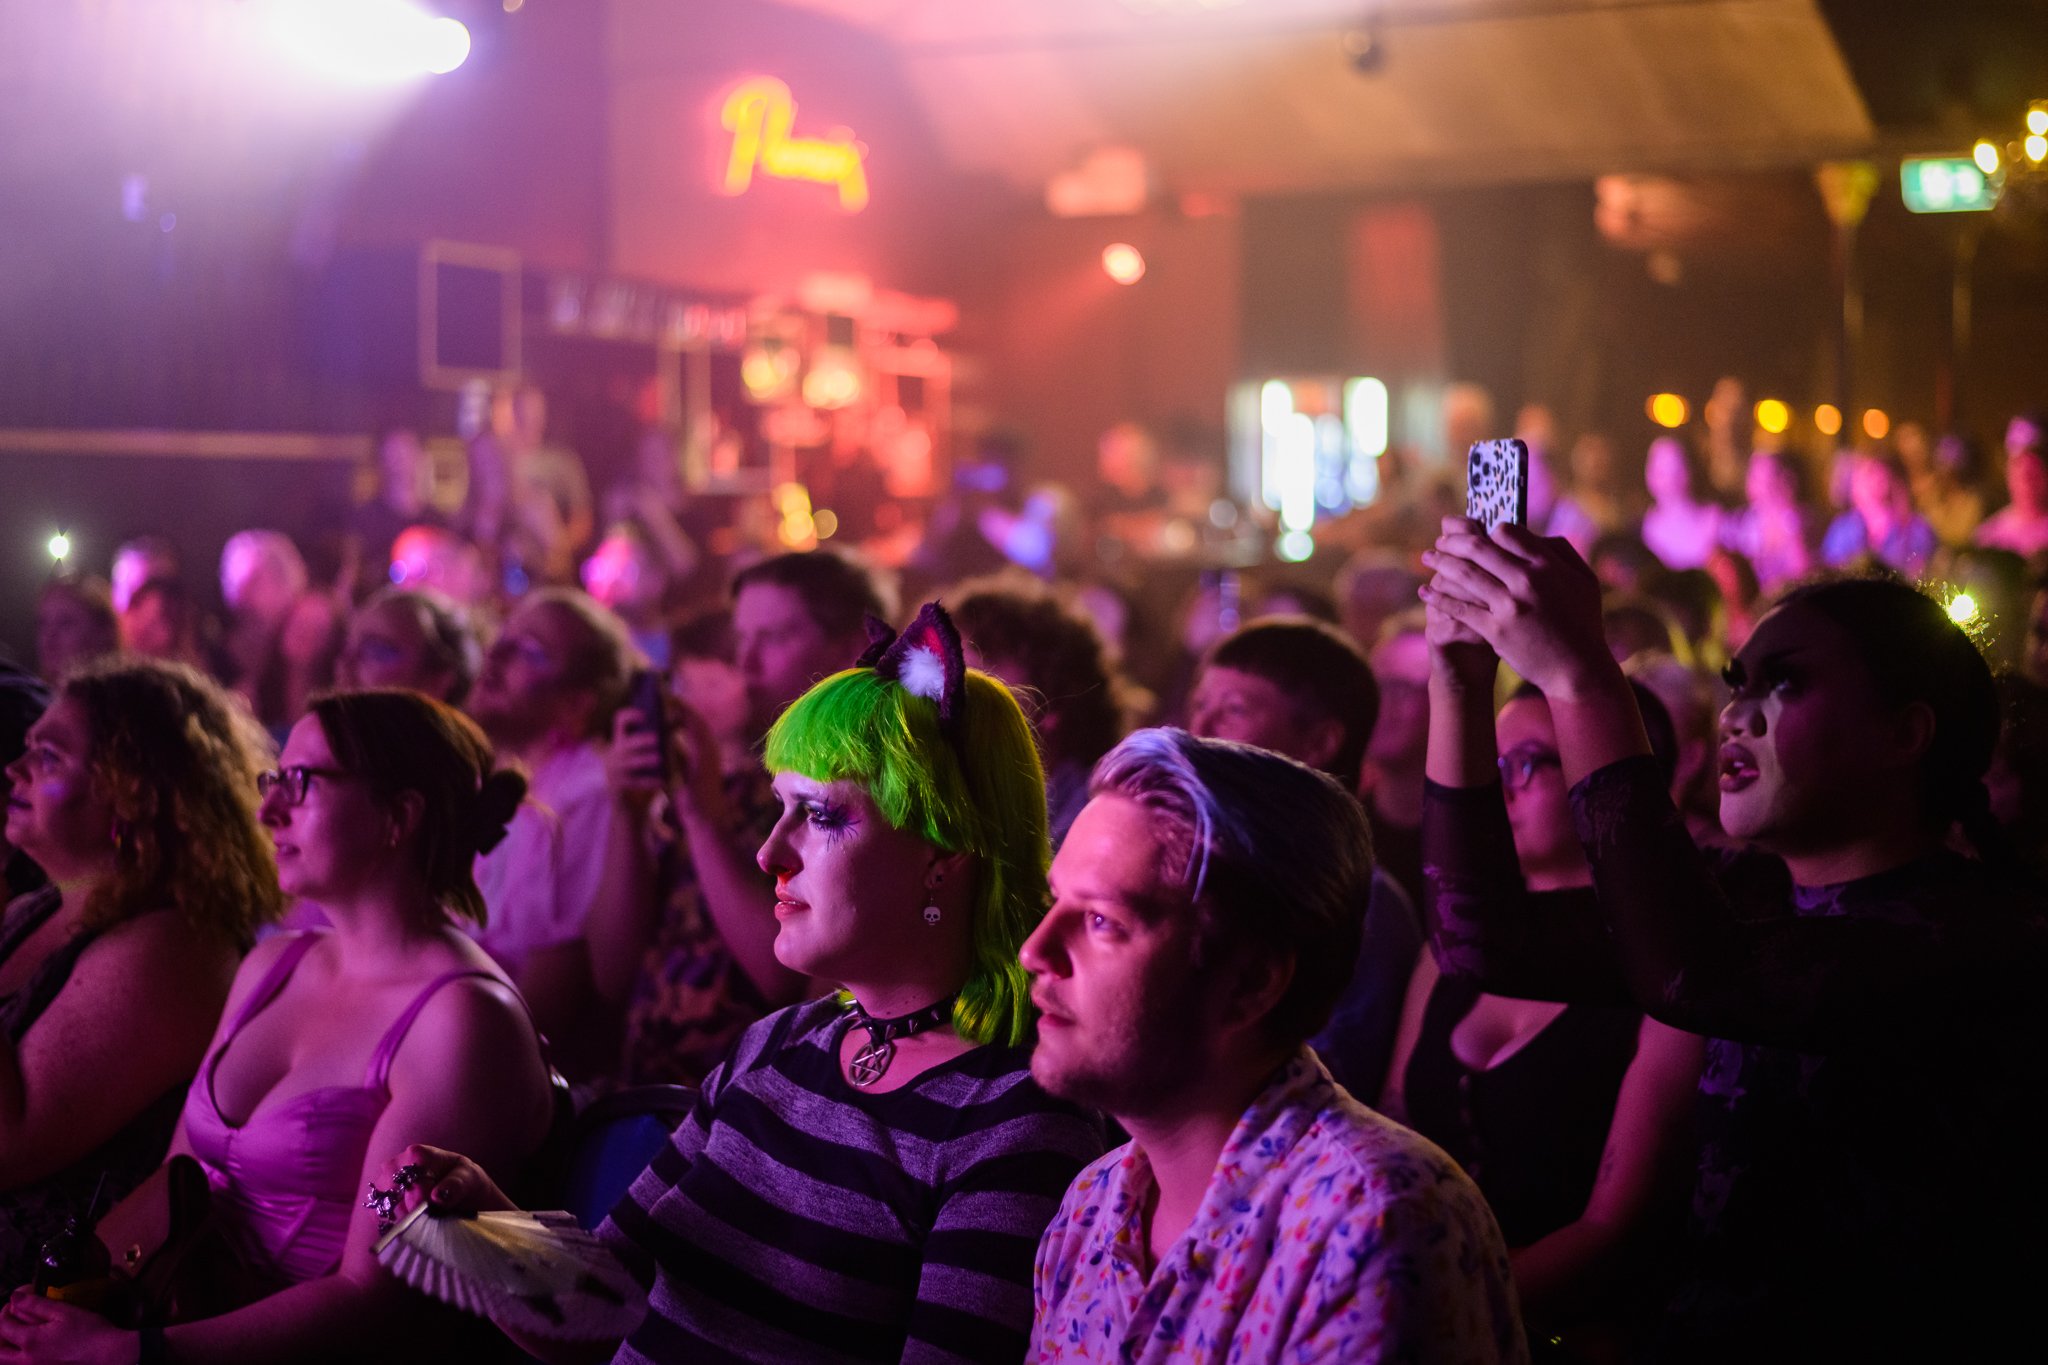   Audience members at the Trans Pride Drag Show  